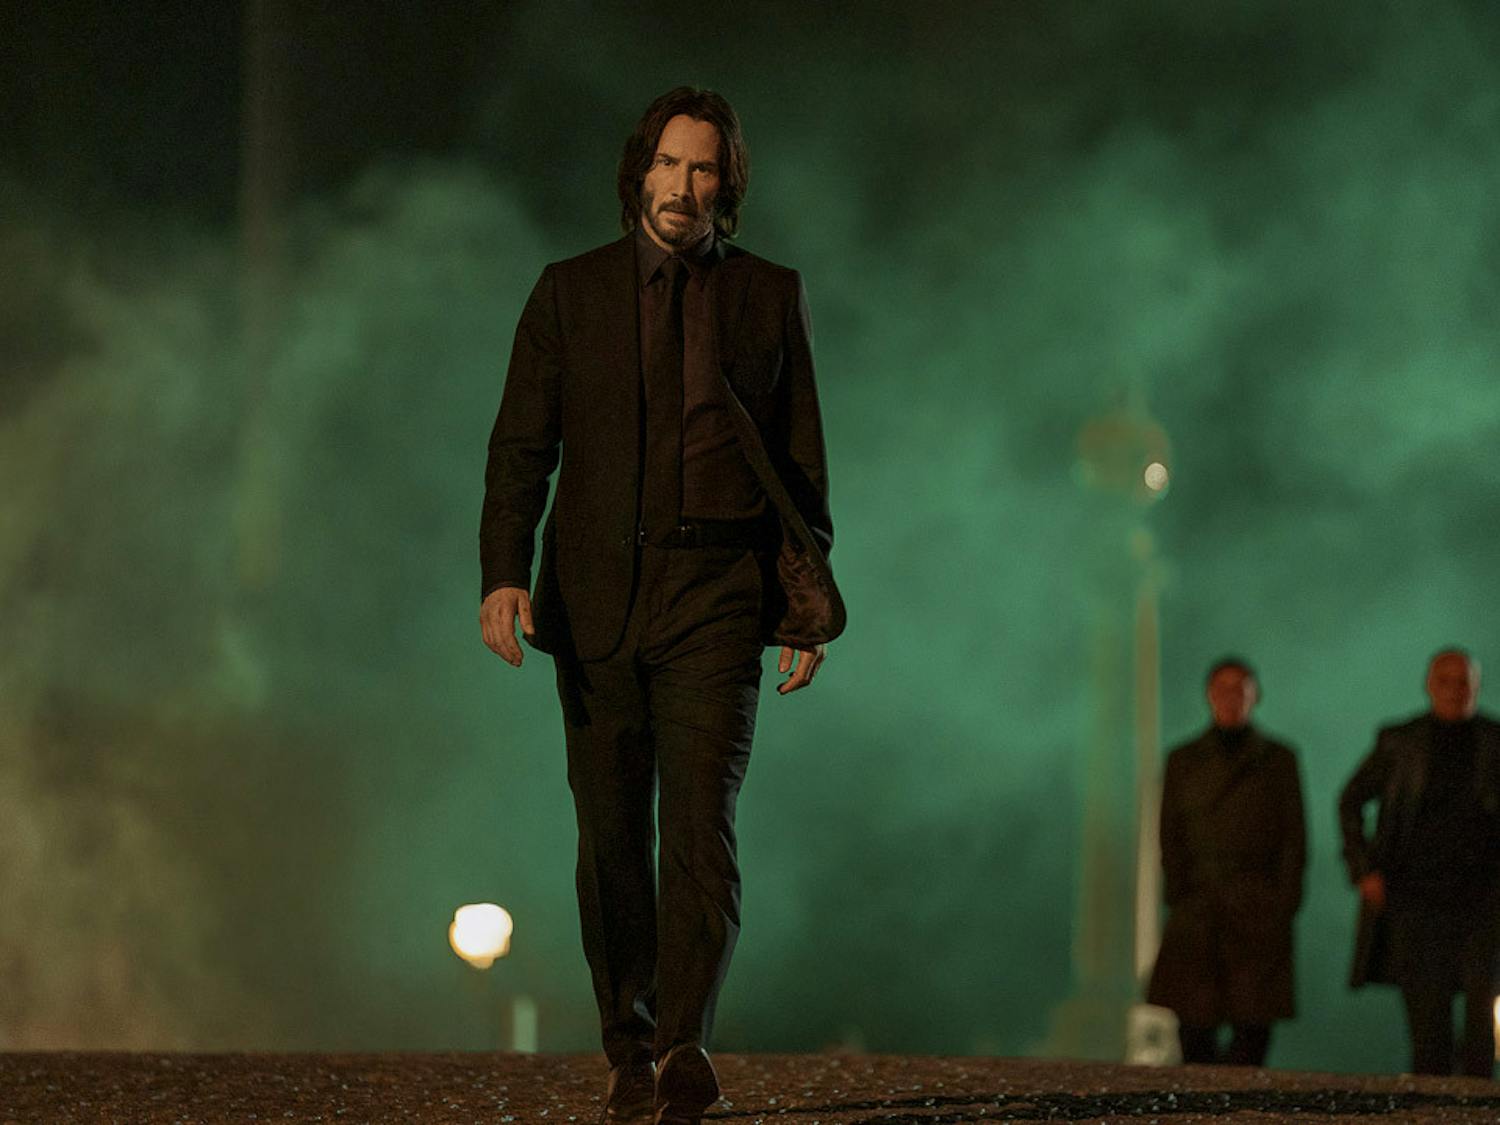 Keanu Reeves as John Wick in "John Wick: Chapter 4." The newest installment of the franchise brought in $73.5 million during its opening weekend, making it the top-grossing film of the series. Film director Chad Stahelski describes the film as a true action epic, paying homage to classic films such as the "Lawrence of Arabia" and "The Good, the Bad and the Ugly."